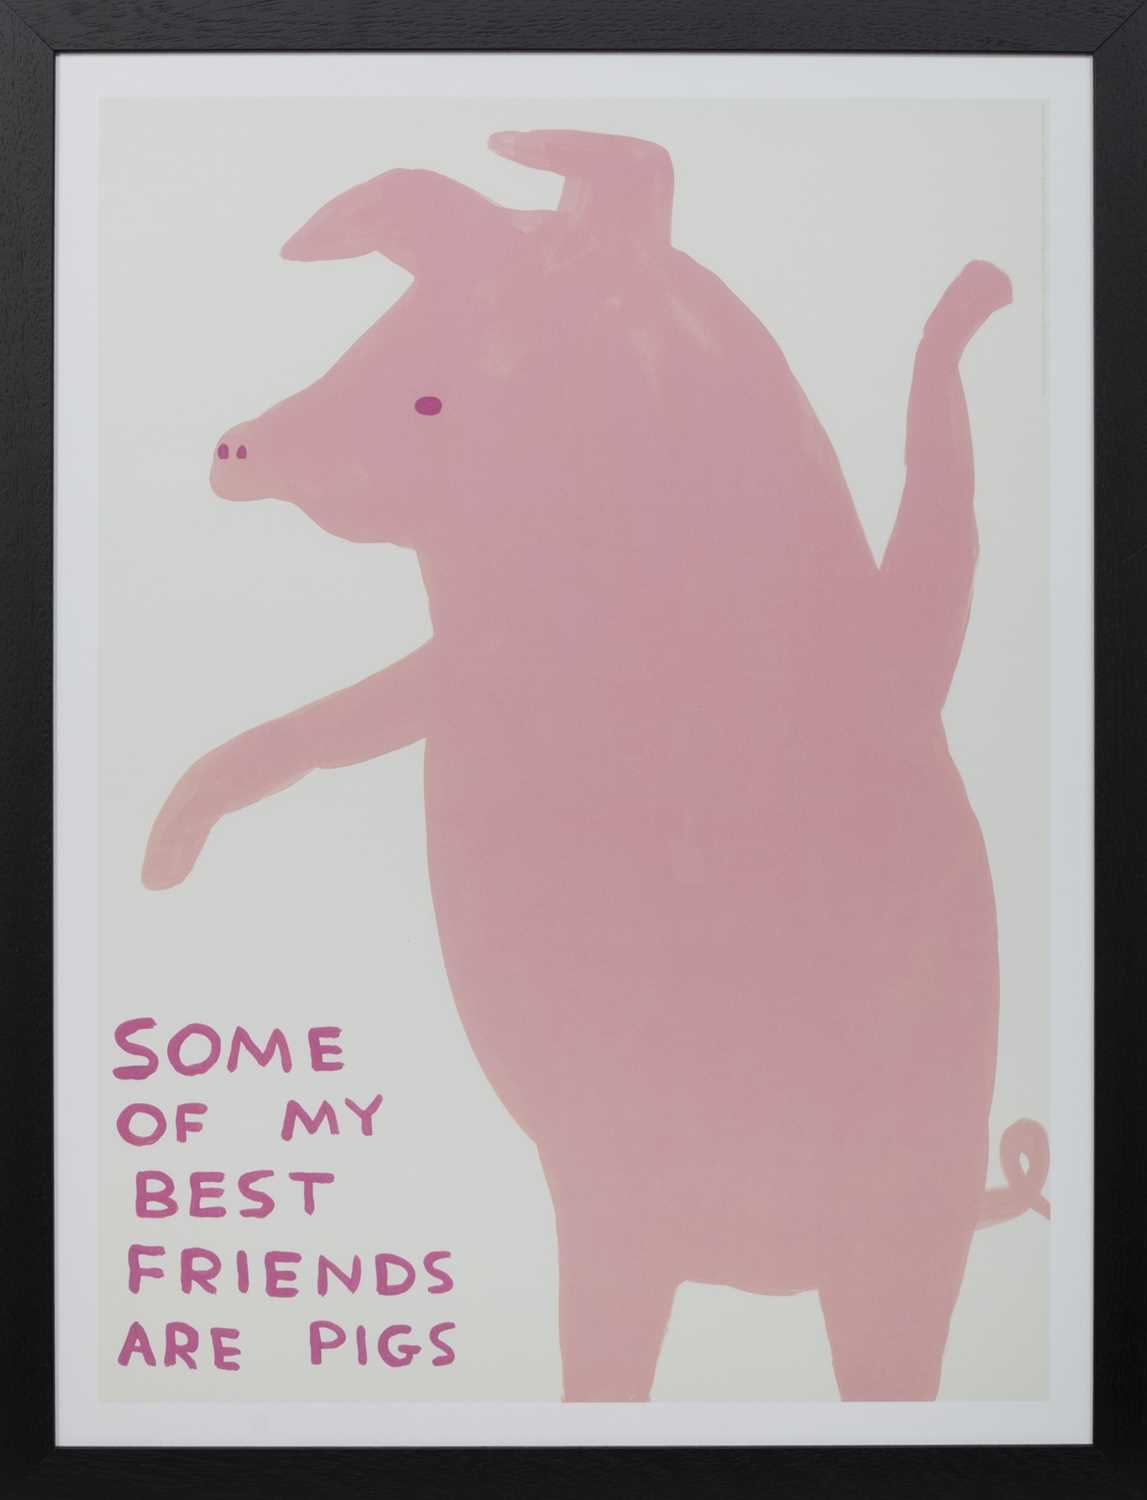 Lot 64 - SOME OF MY BEST FRIENDS ARE PIGS, A LITHOGRAPH BY DAVID SHRIGLEY